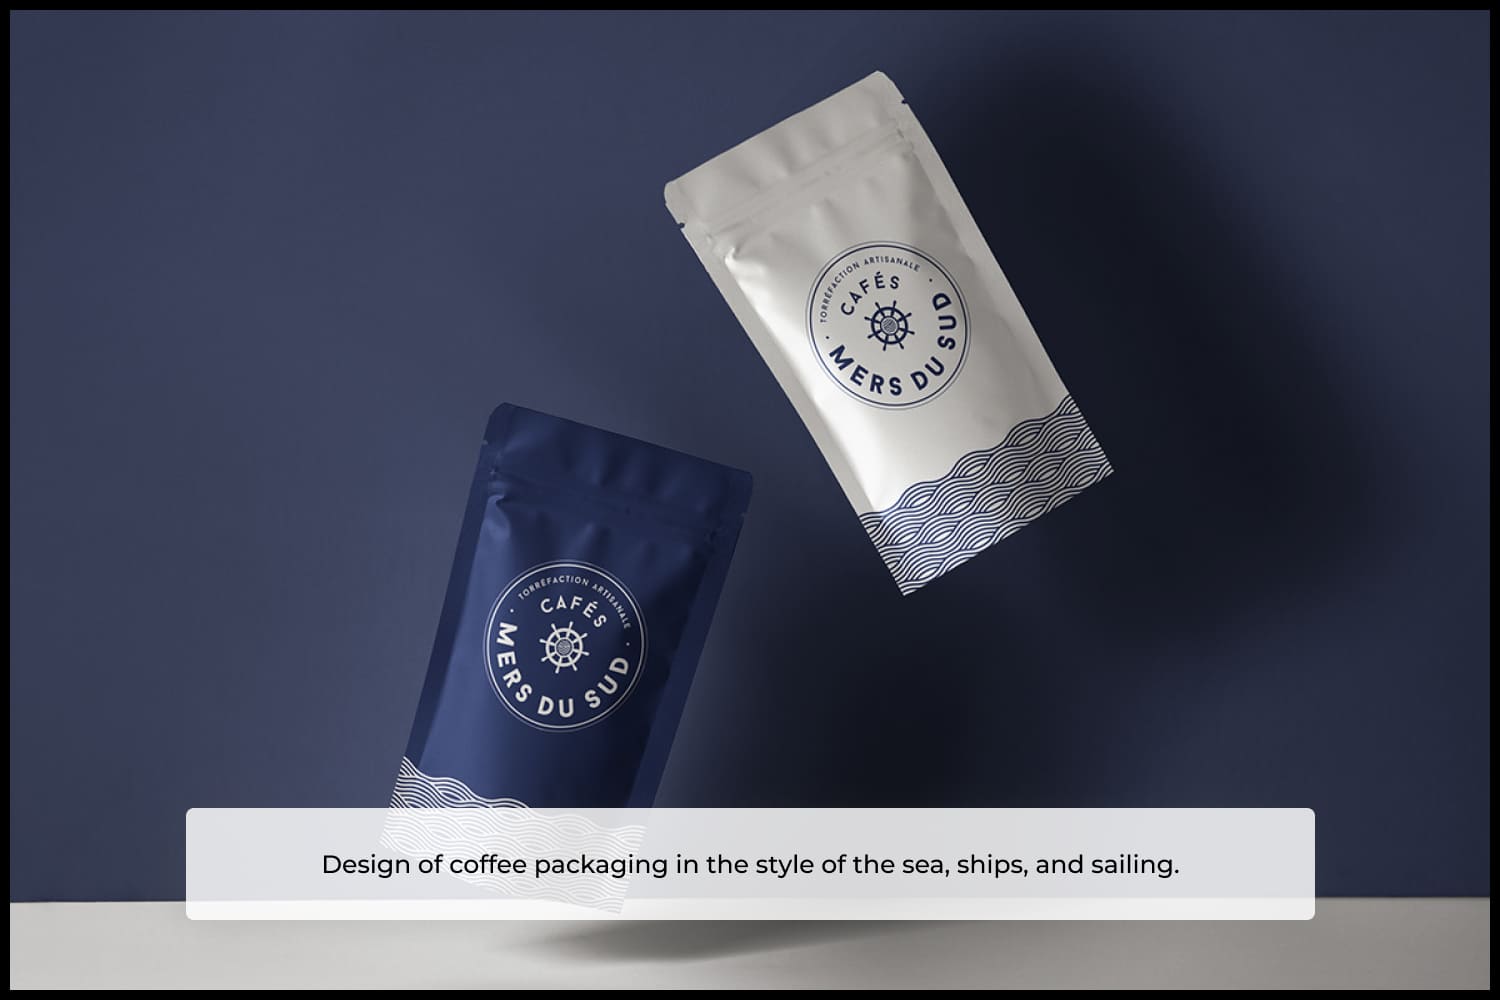 Design of coffee packaging in the style of the sea, ships, and sailing.